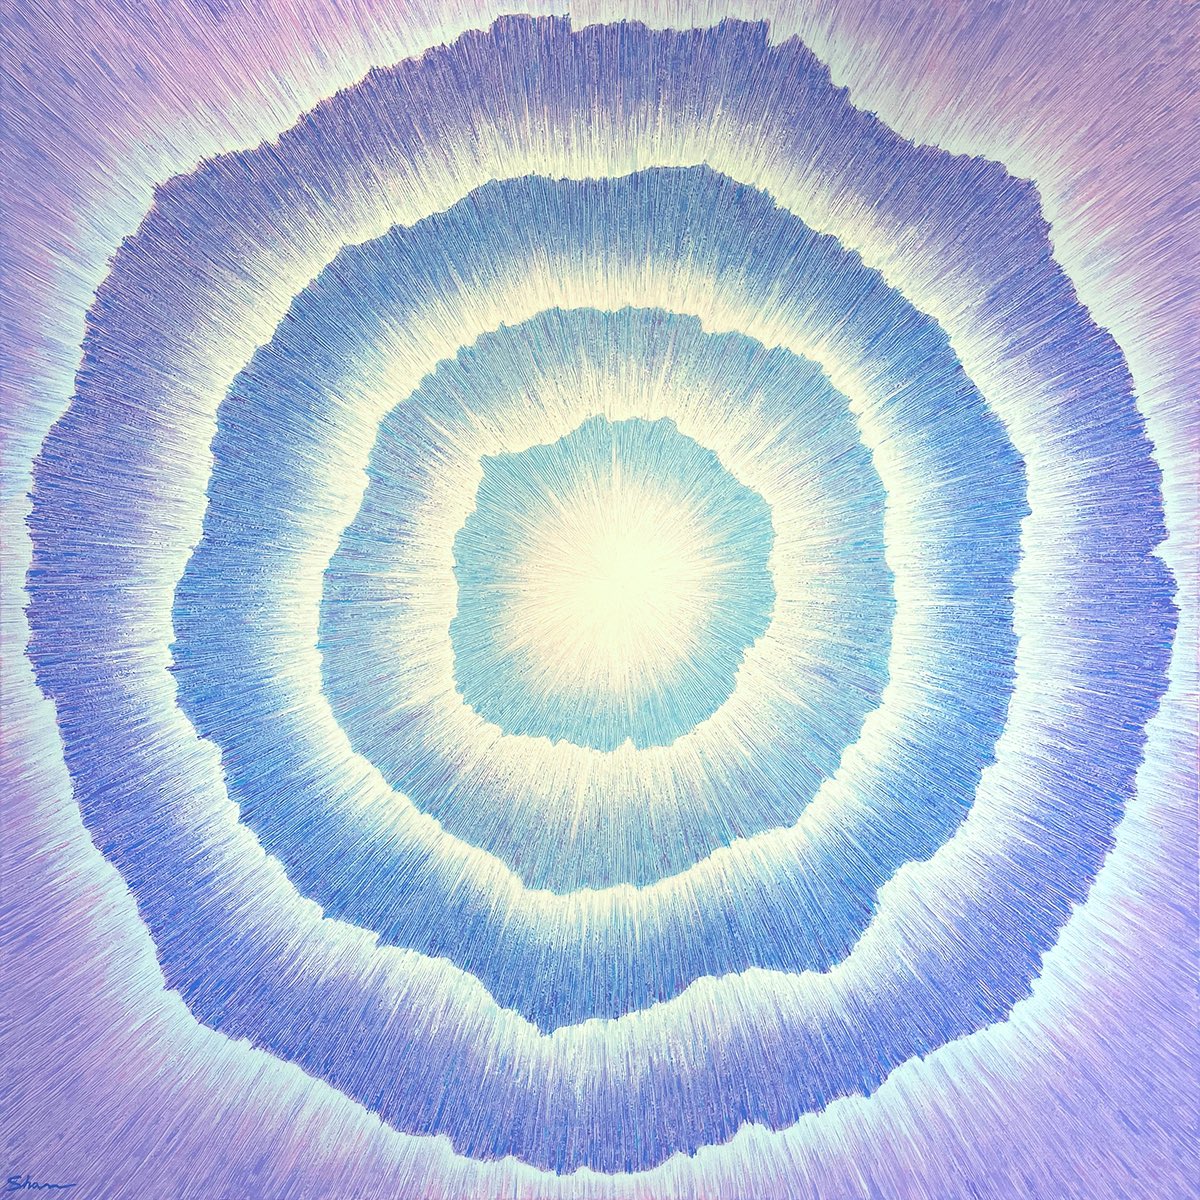 Shan Ogdemli, ‘Blue Supernova,’ 60 x 60 inches, acrylic and diatomaceous earth on canvas. Debuting at the Palm Beach Show, February 15 - 20, at the Beach Convention Center; Steidel Contemporary, Booth #438/539. I hope you’ll drop by if you’re in the area. #palmbeachshow